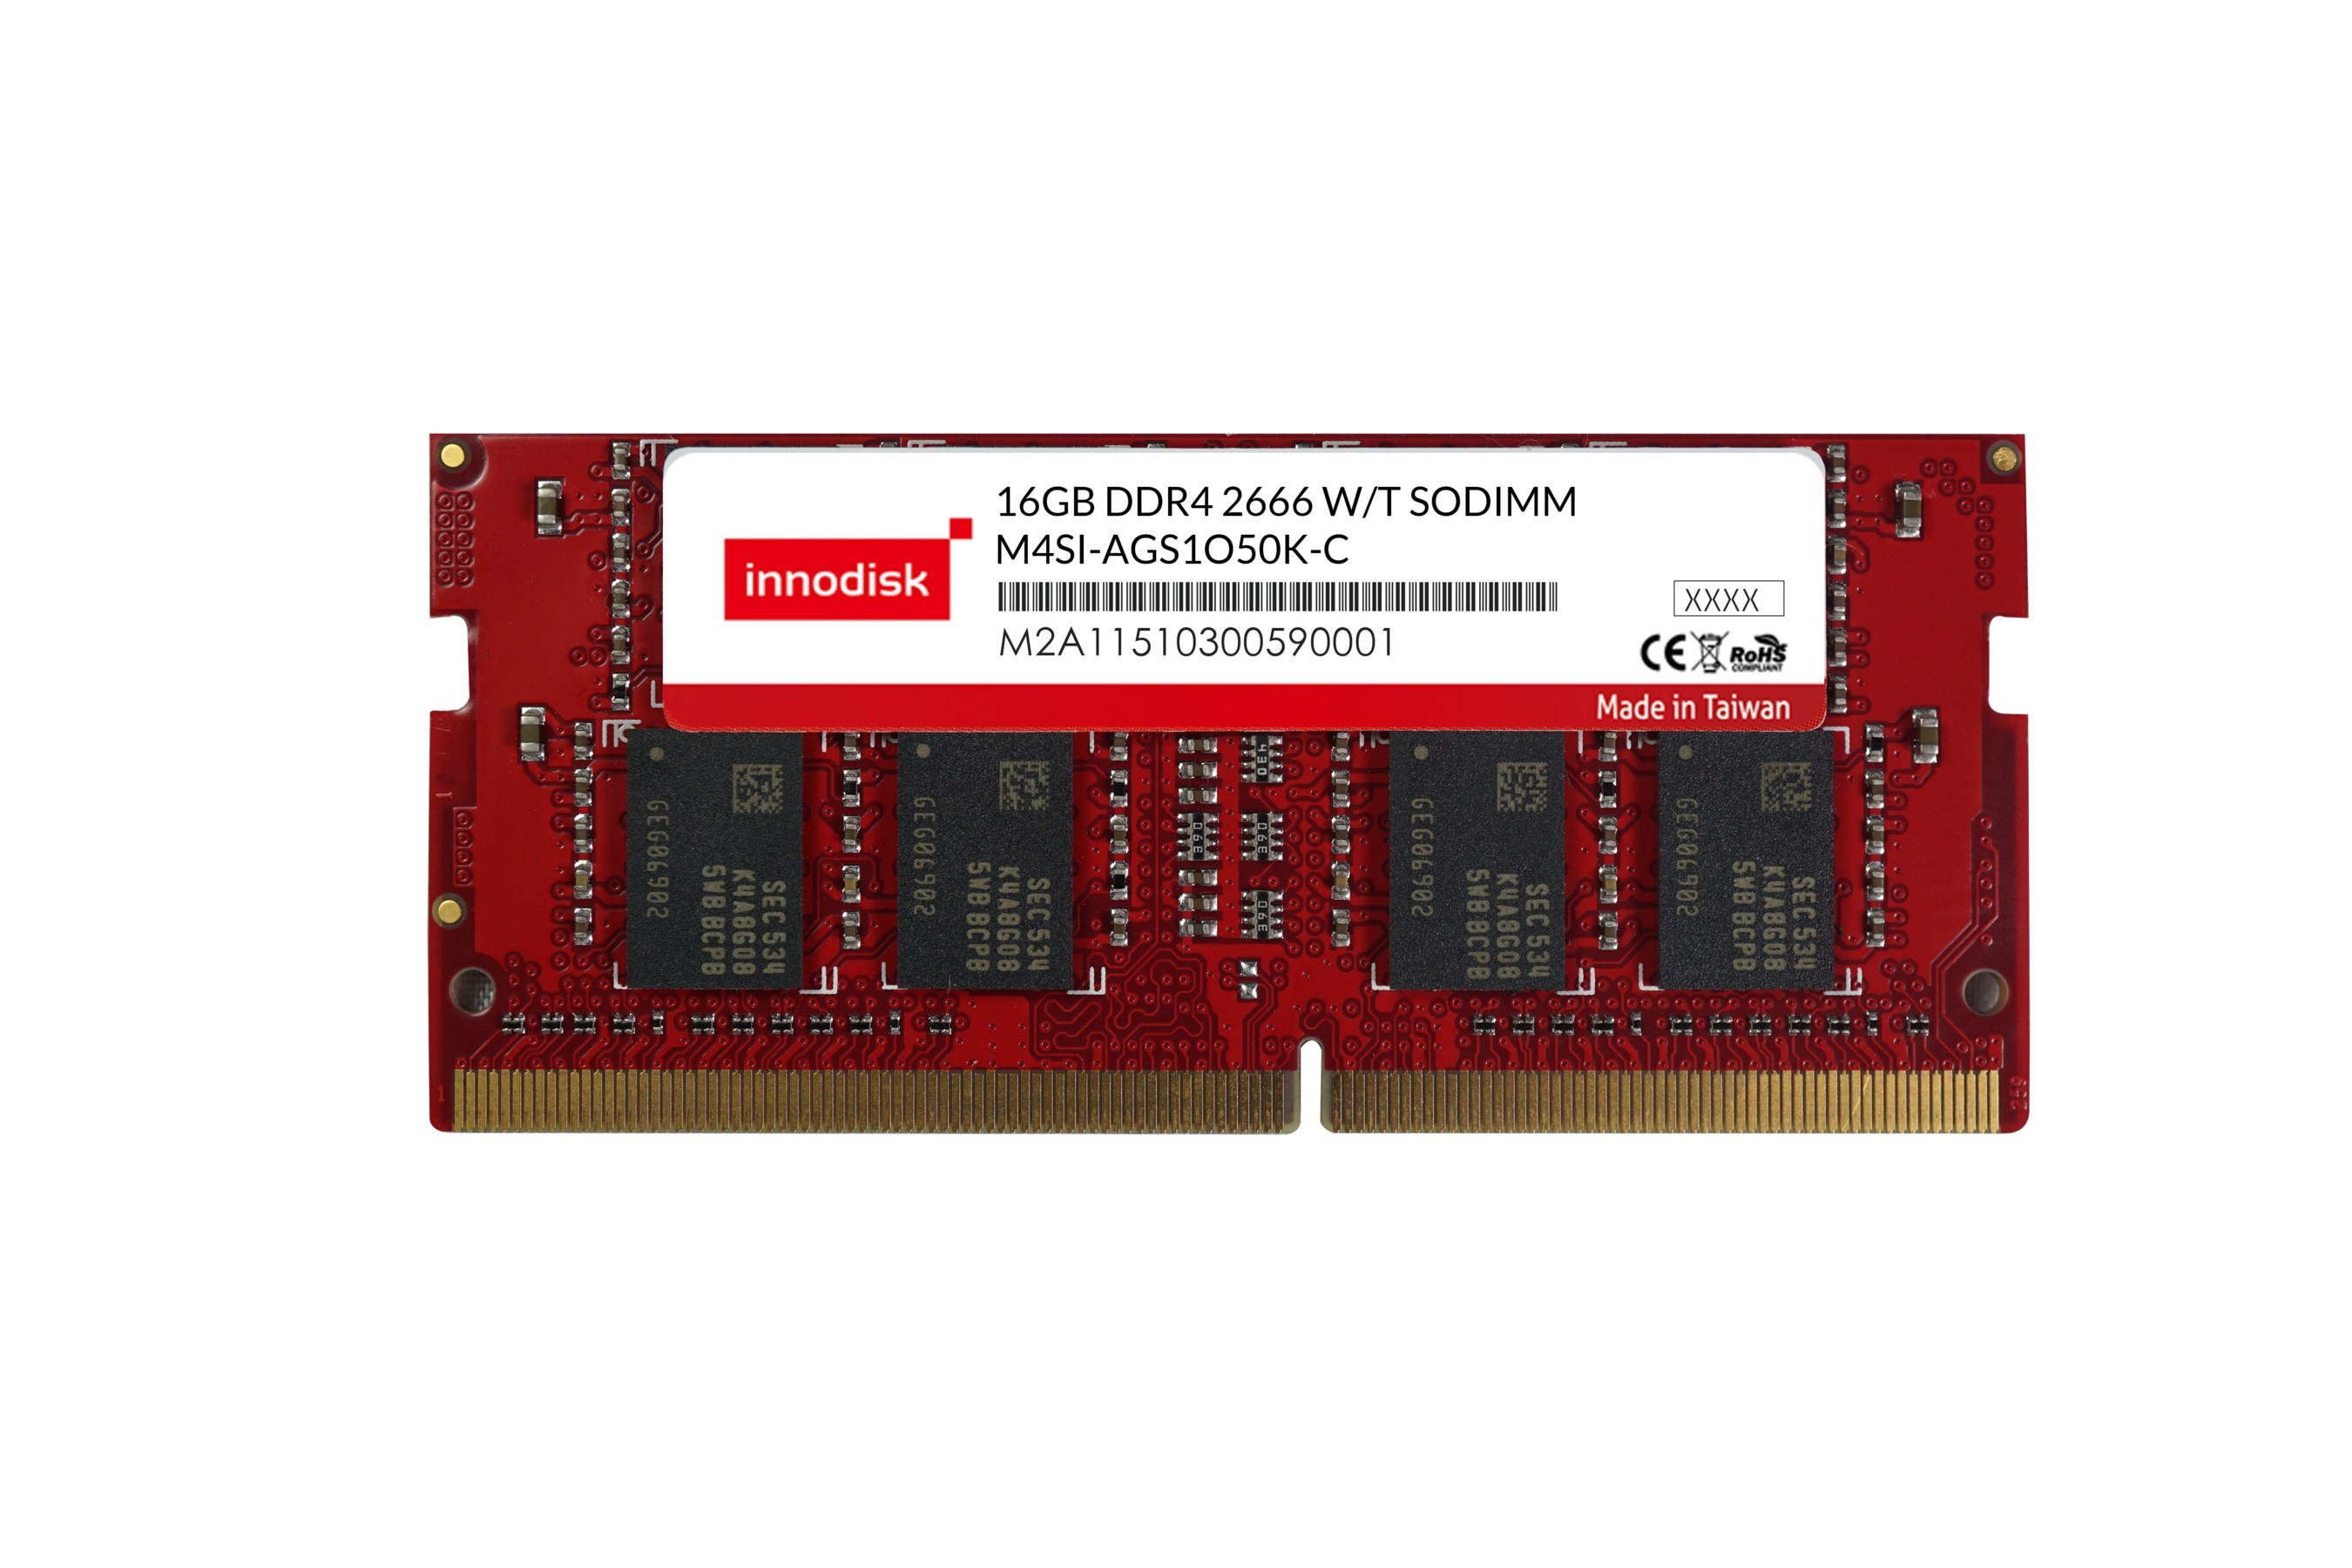 Innodisk Seizing the Edge with Industry’s Fastest Wide Temp DDR4 Memory